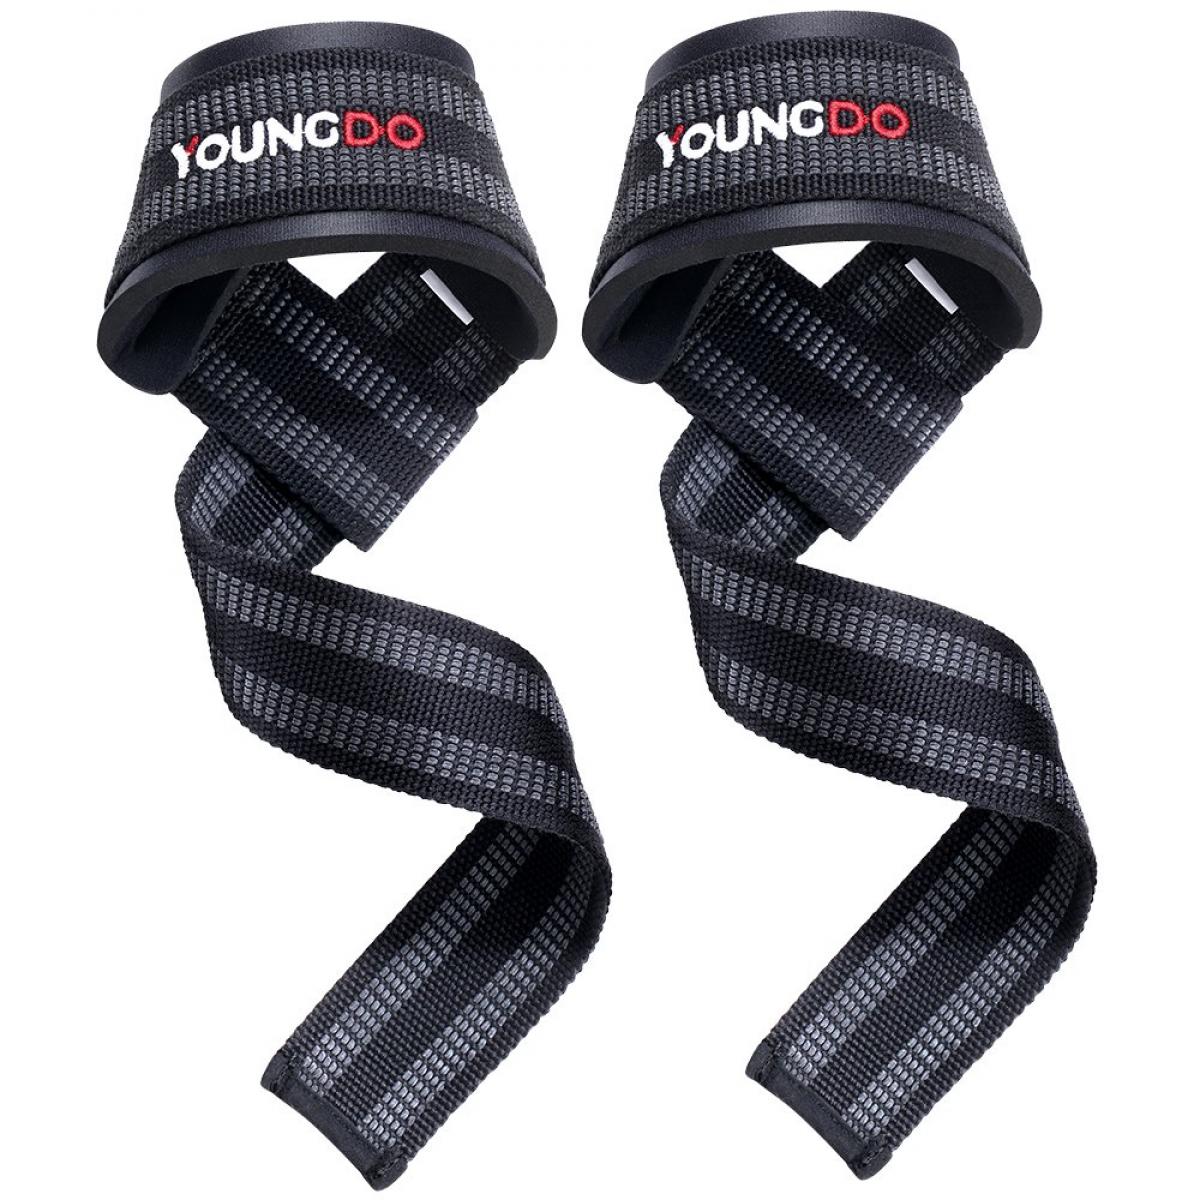  PICSIL Wrist Straps, Padded Wrist Straps for Weightlifting,  Extended Deadlift Straps for Grip Support, Advanced Weightlifting Straps  for Comfort and Stability, 1 Pair, Black : Sports & Outdoors